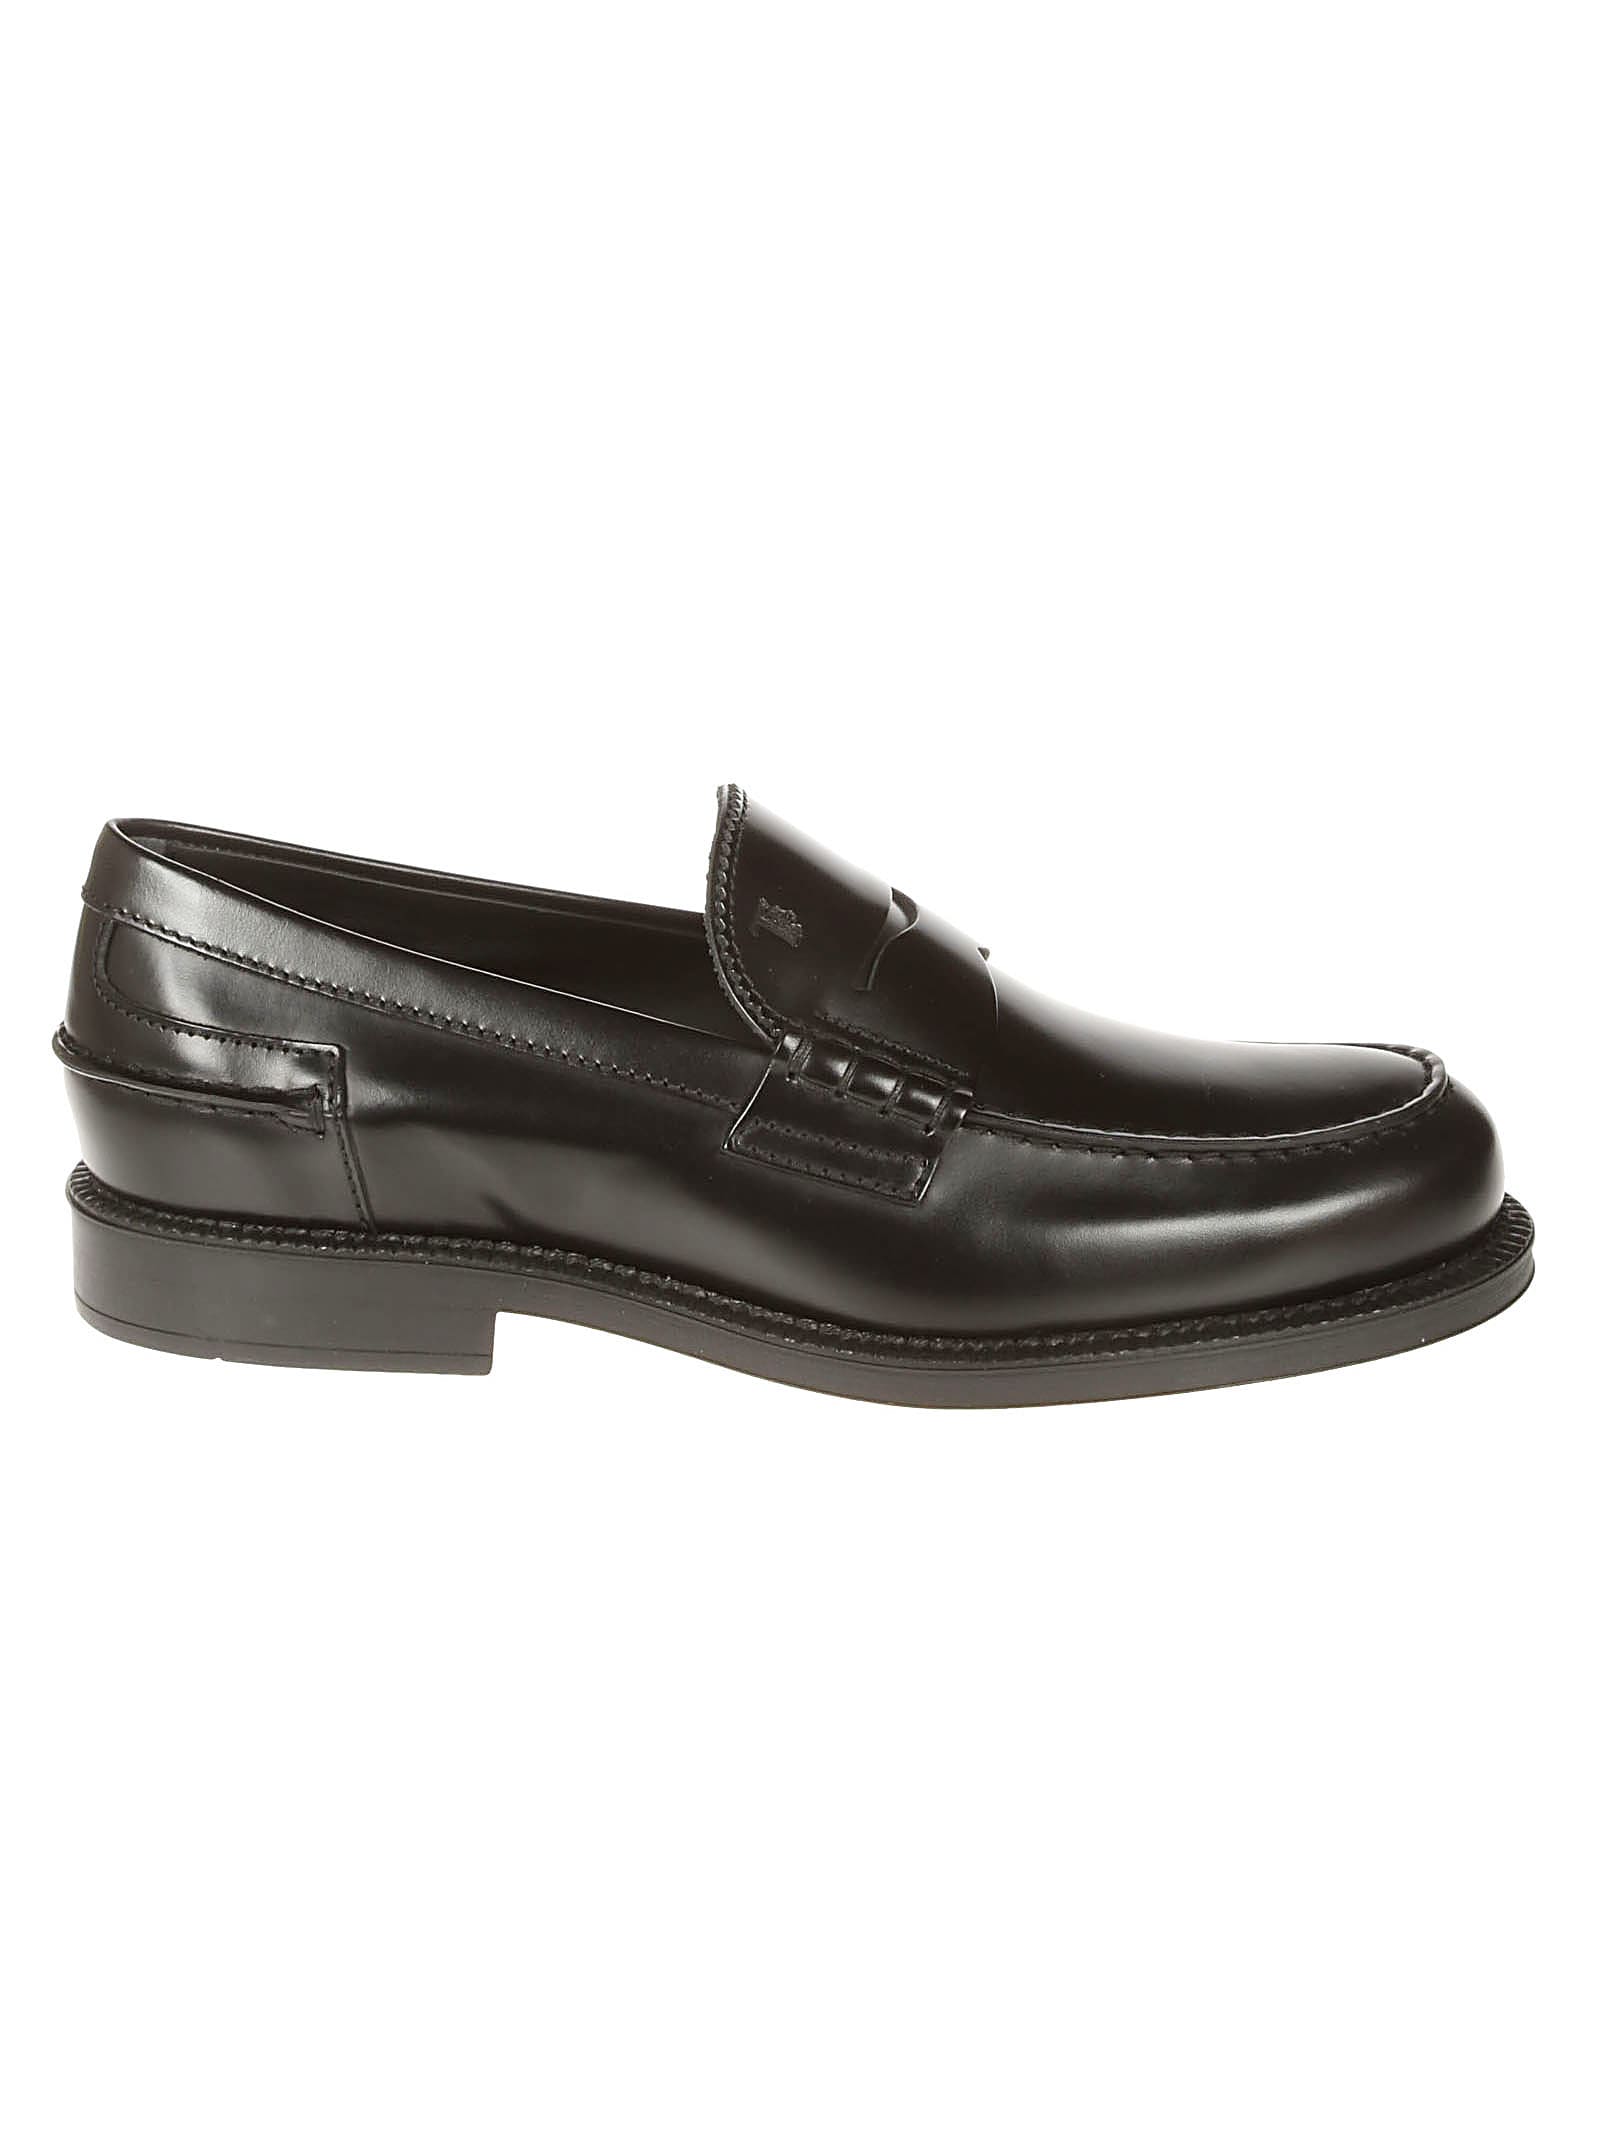 Tods Logo Stamp Loafers